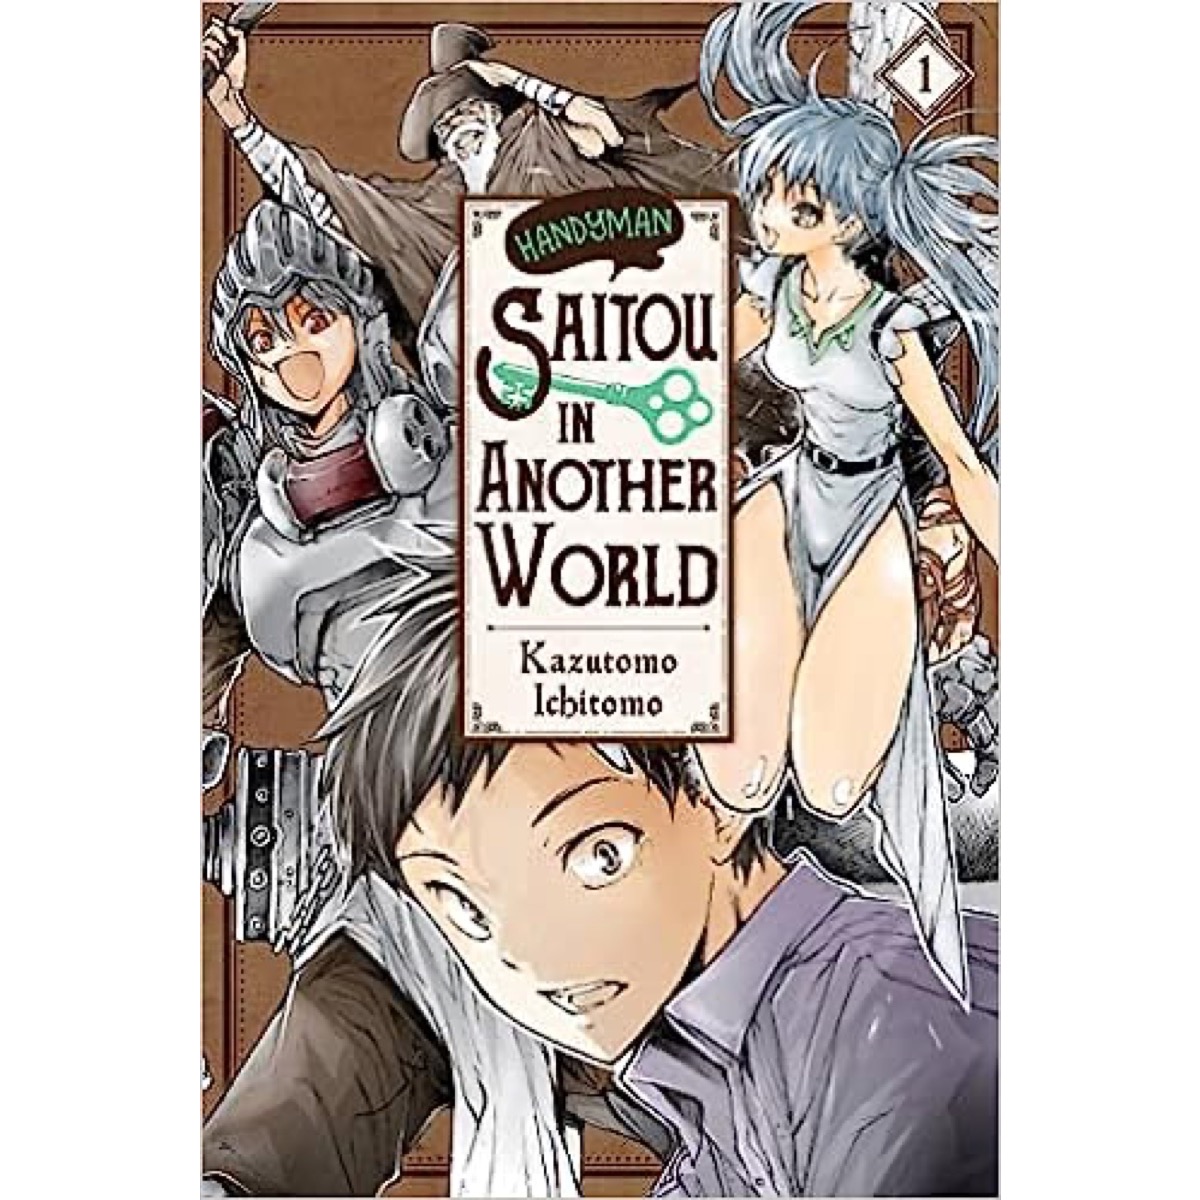 Handyman Saitou in Another World - The Complete Season - Blu-ray